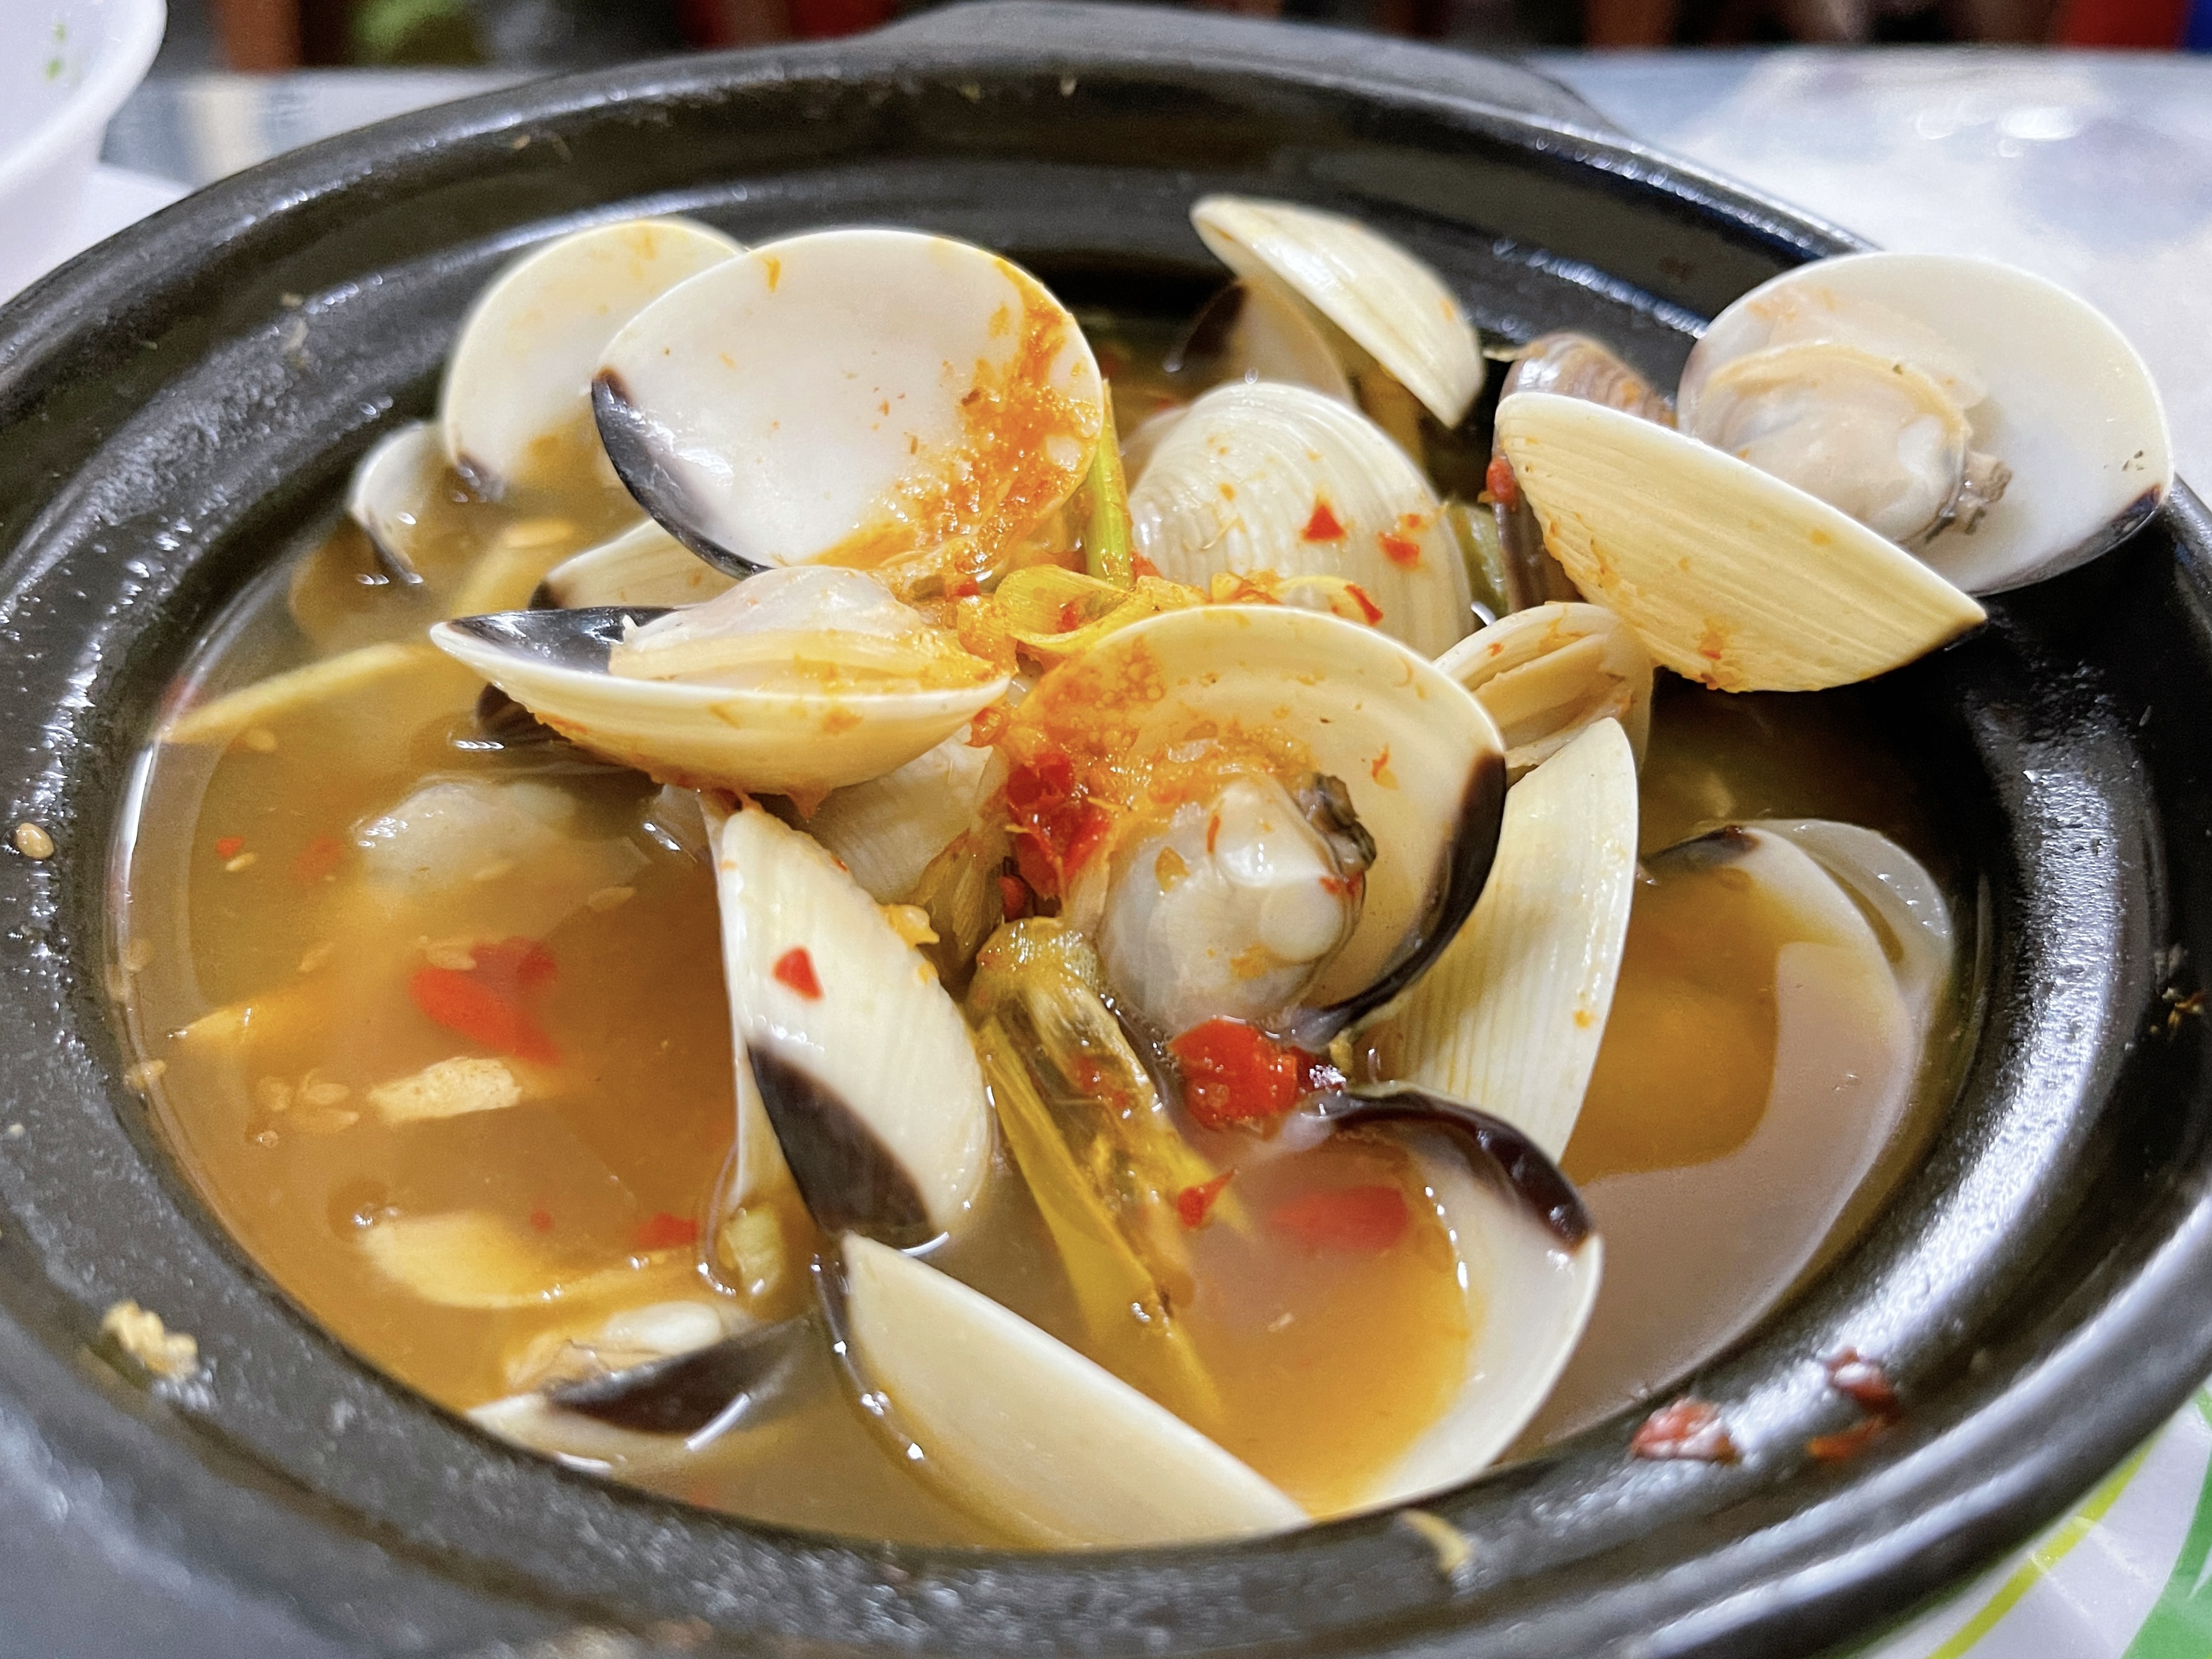 A portion of 'ngheu hap Thai' (clams steamed in Thay style), a famous dish can be found at every snail stall in Saigon. Photo: Dong Nguyen / Tuoi Tre News